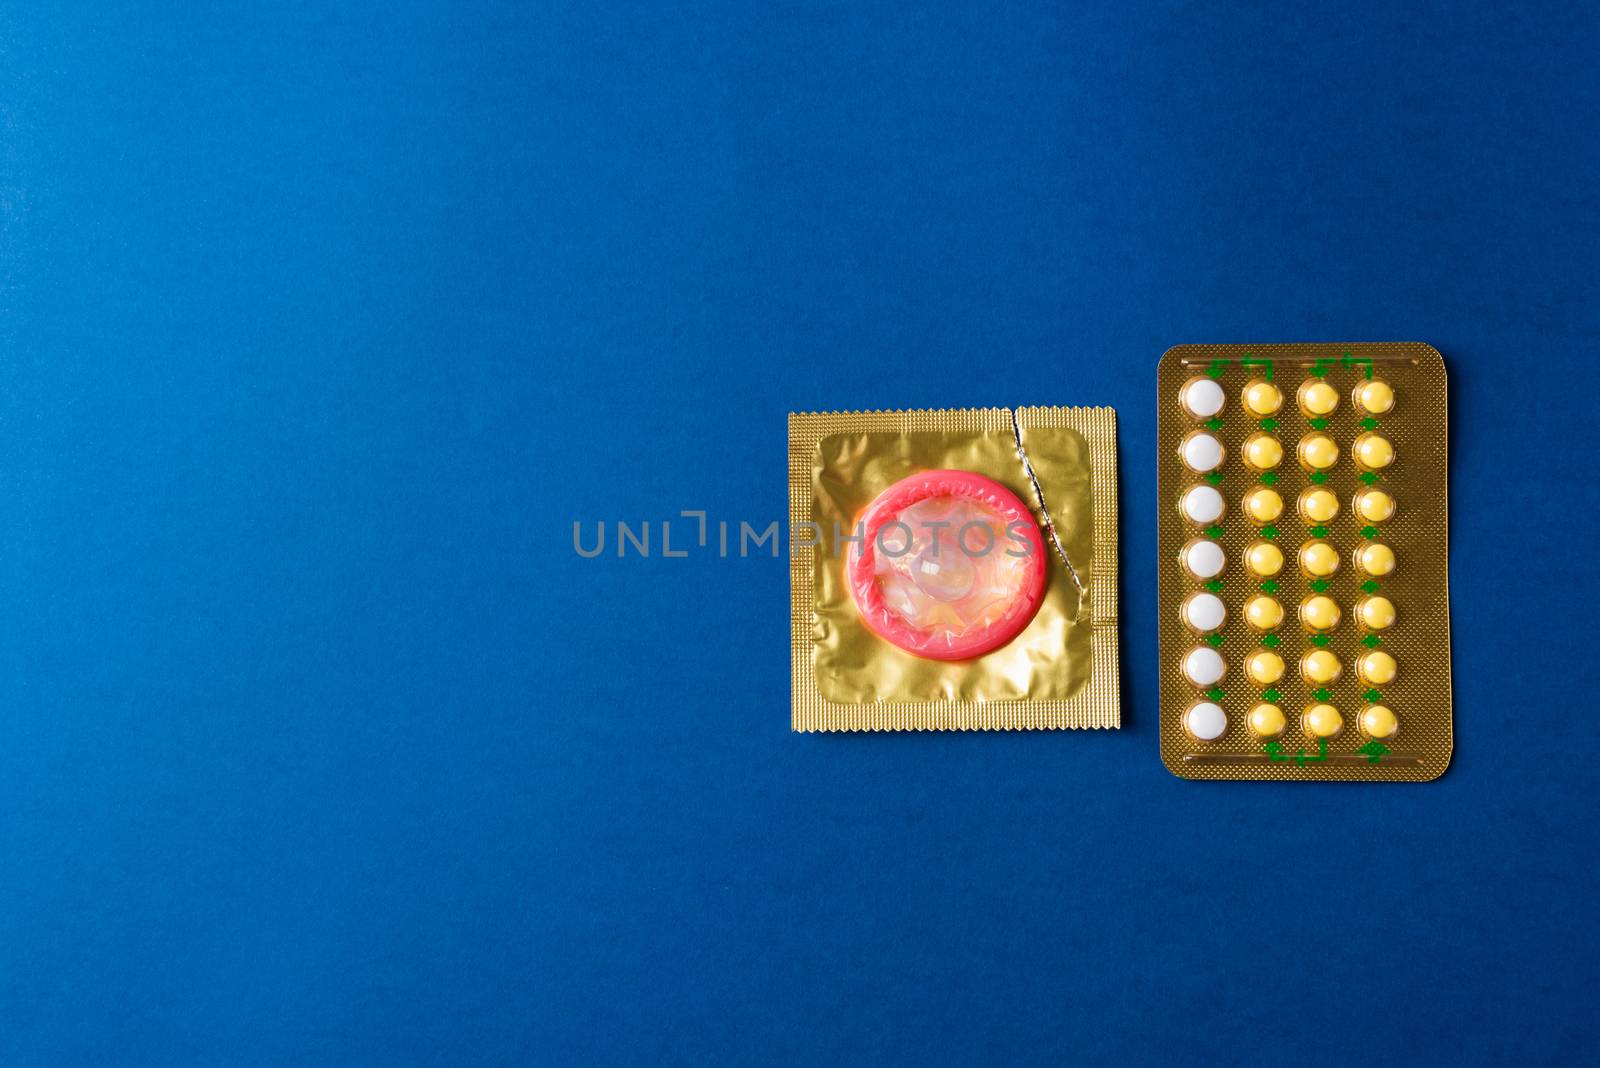 World sexual health or Aids day, condom on wrapper pack and contraceptive pills blister hormonal birth control pills, studio shot isolated on a dark blue background, Safe sex and reproductive health concept